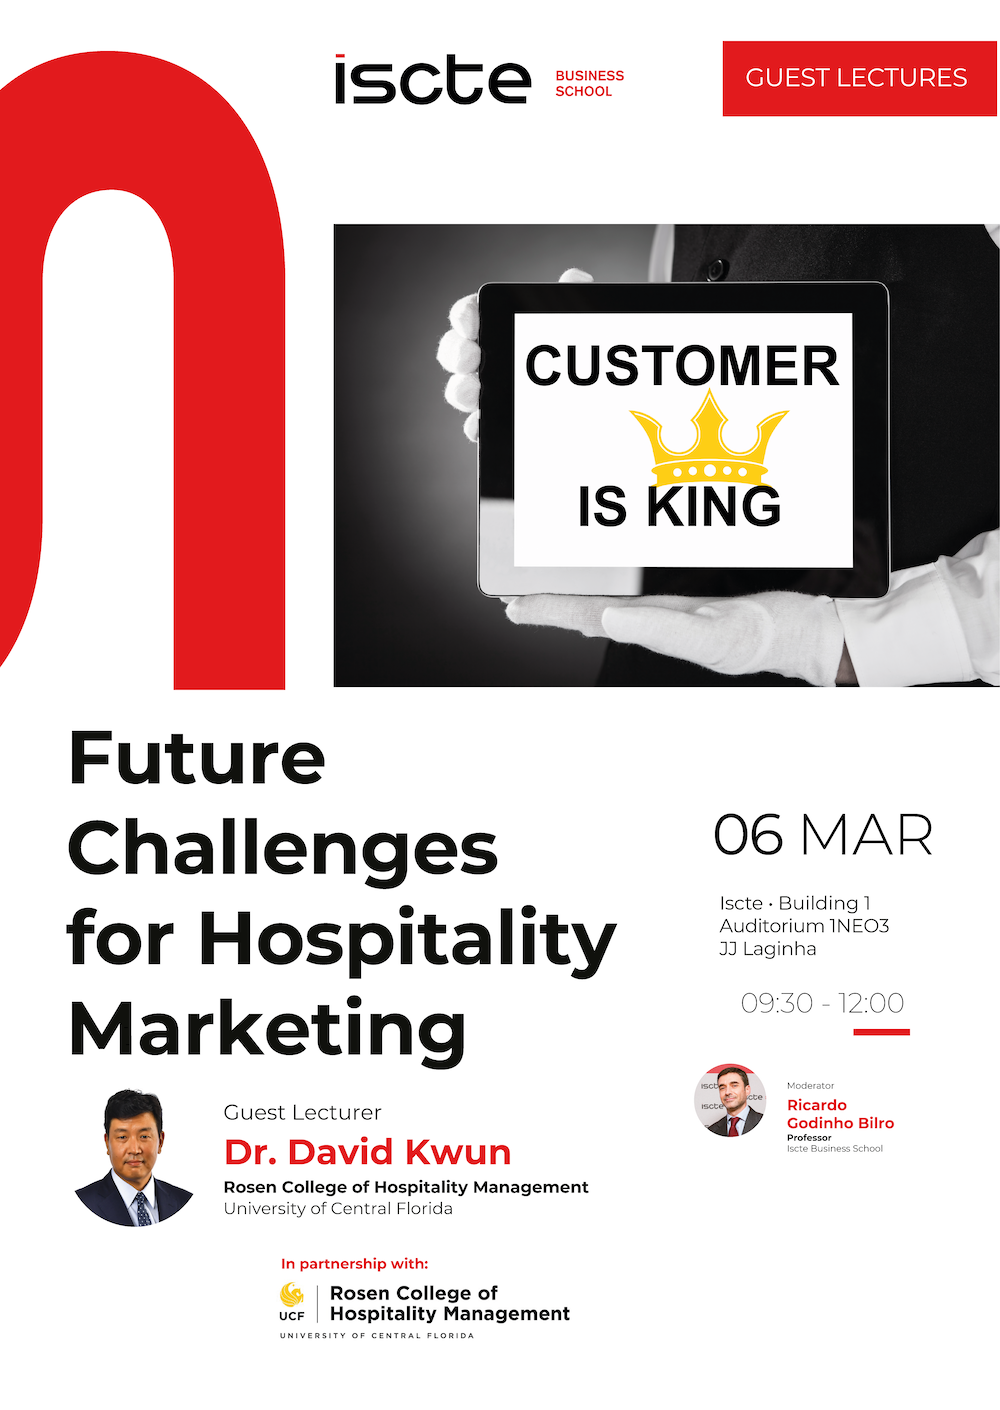 Futuro Challenges for Hospitality Marketing